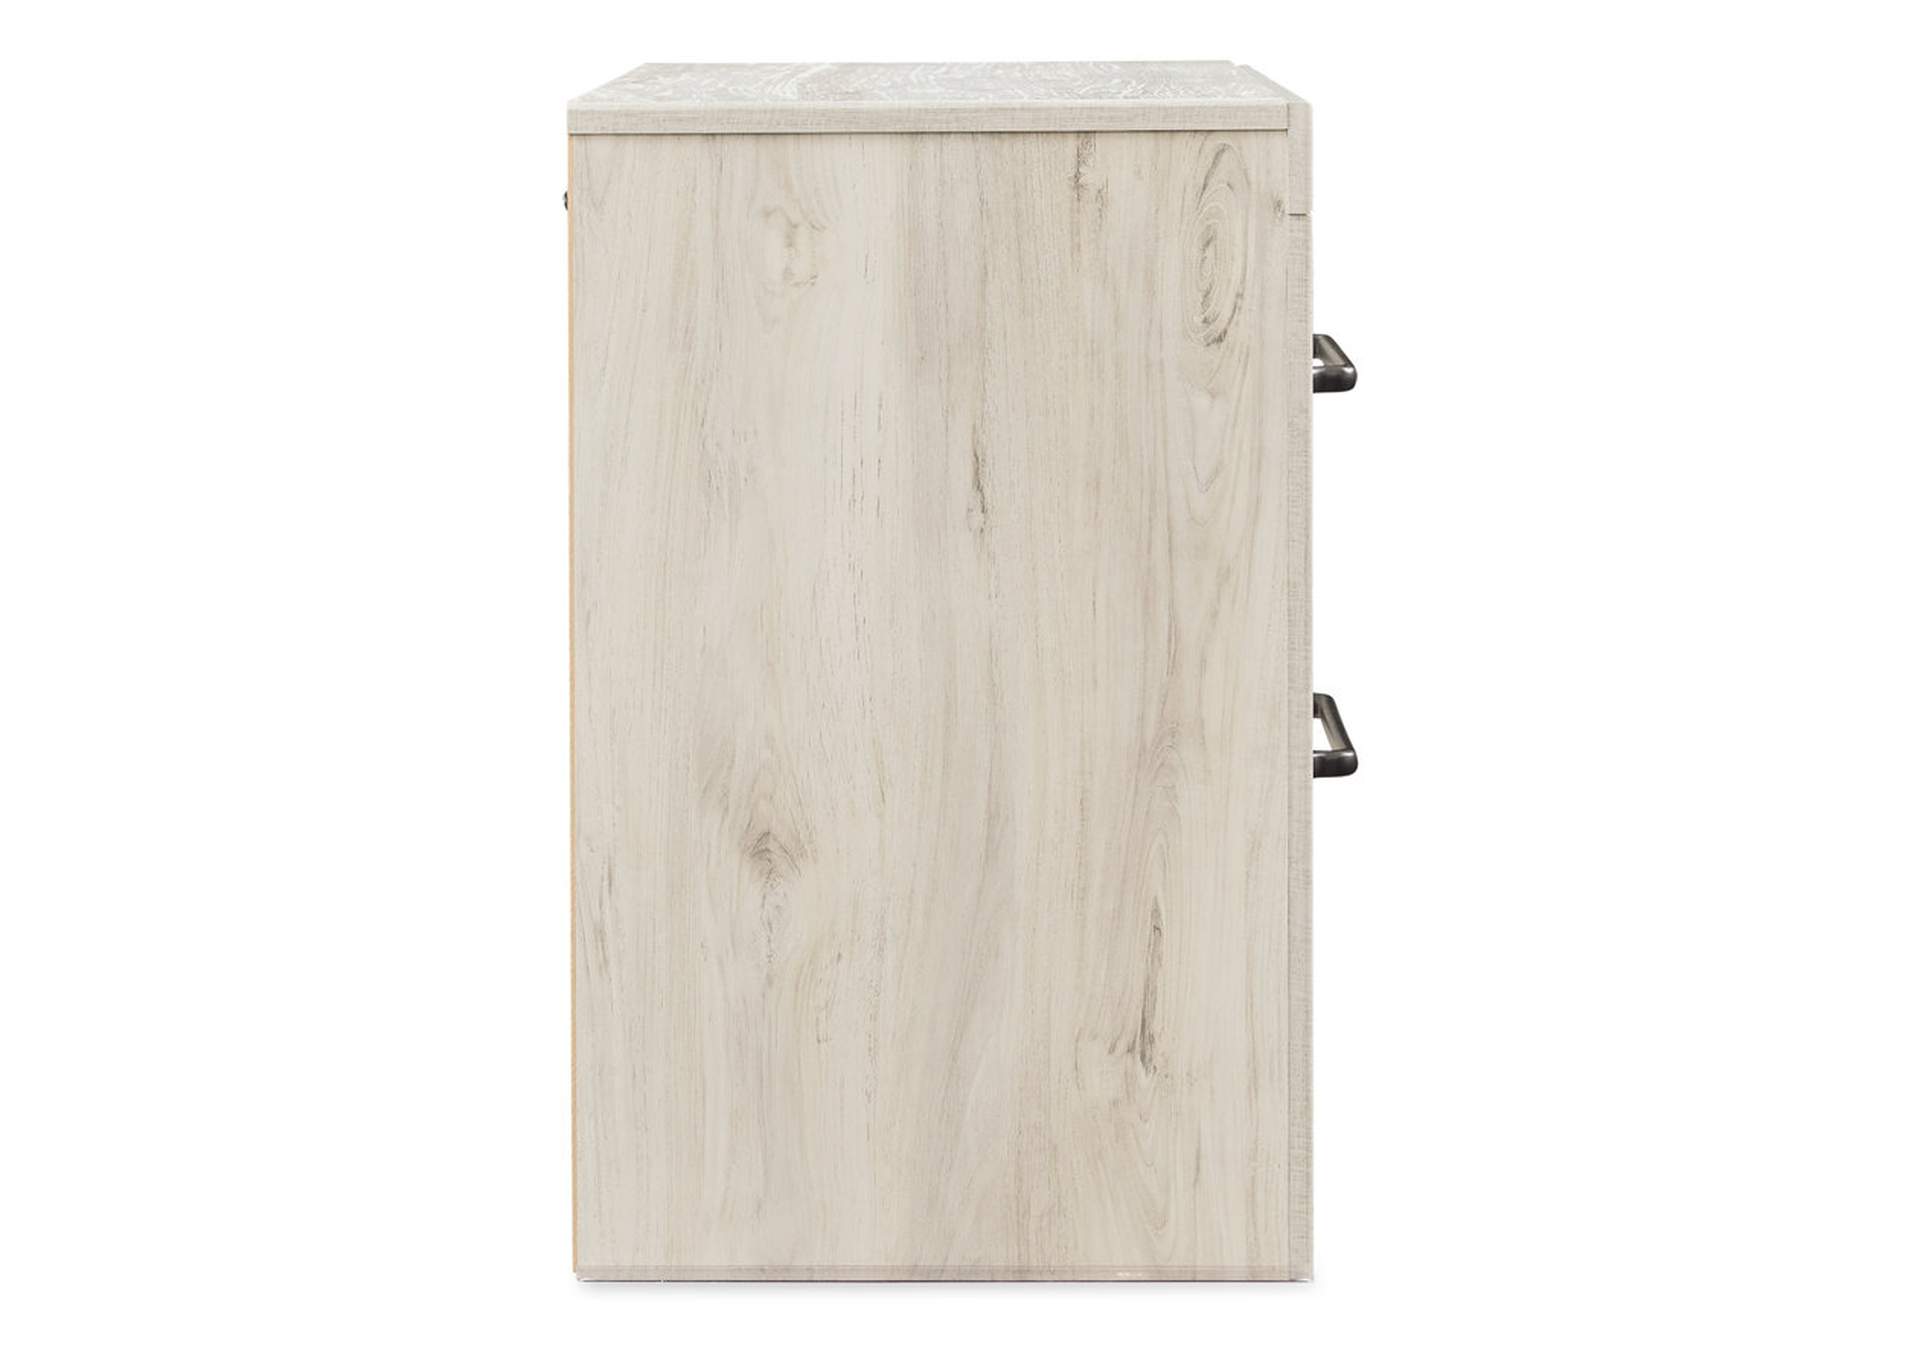 Cambeck Whitewash Nightstand,Direct To Consumer Express